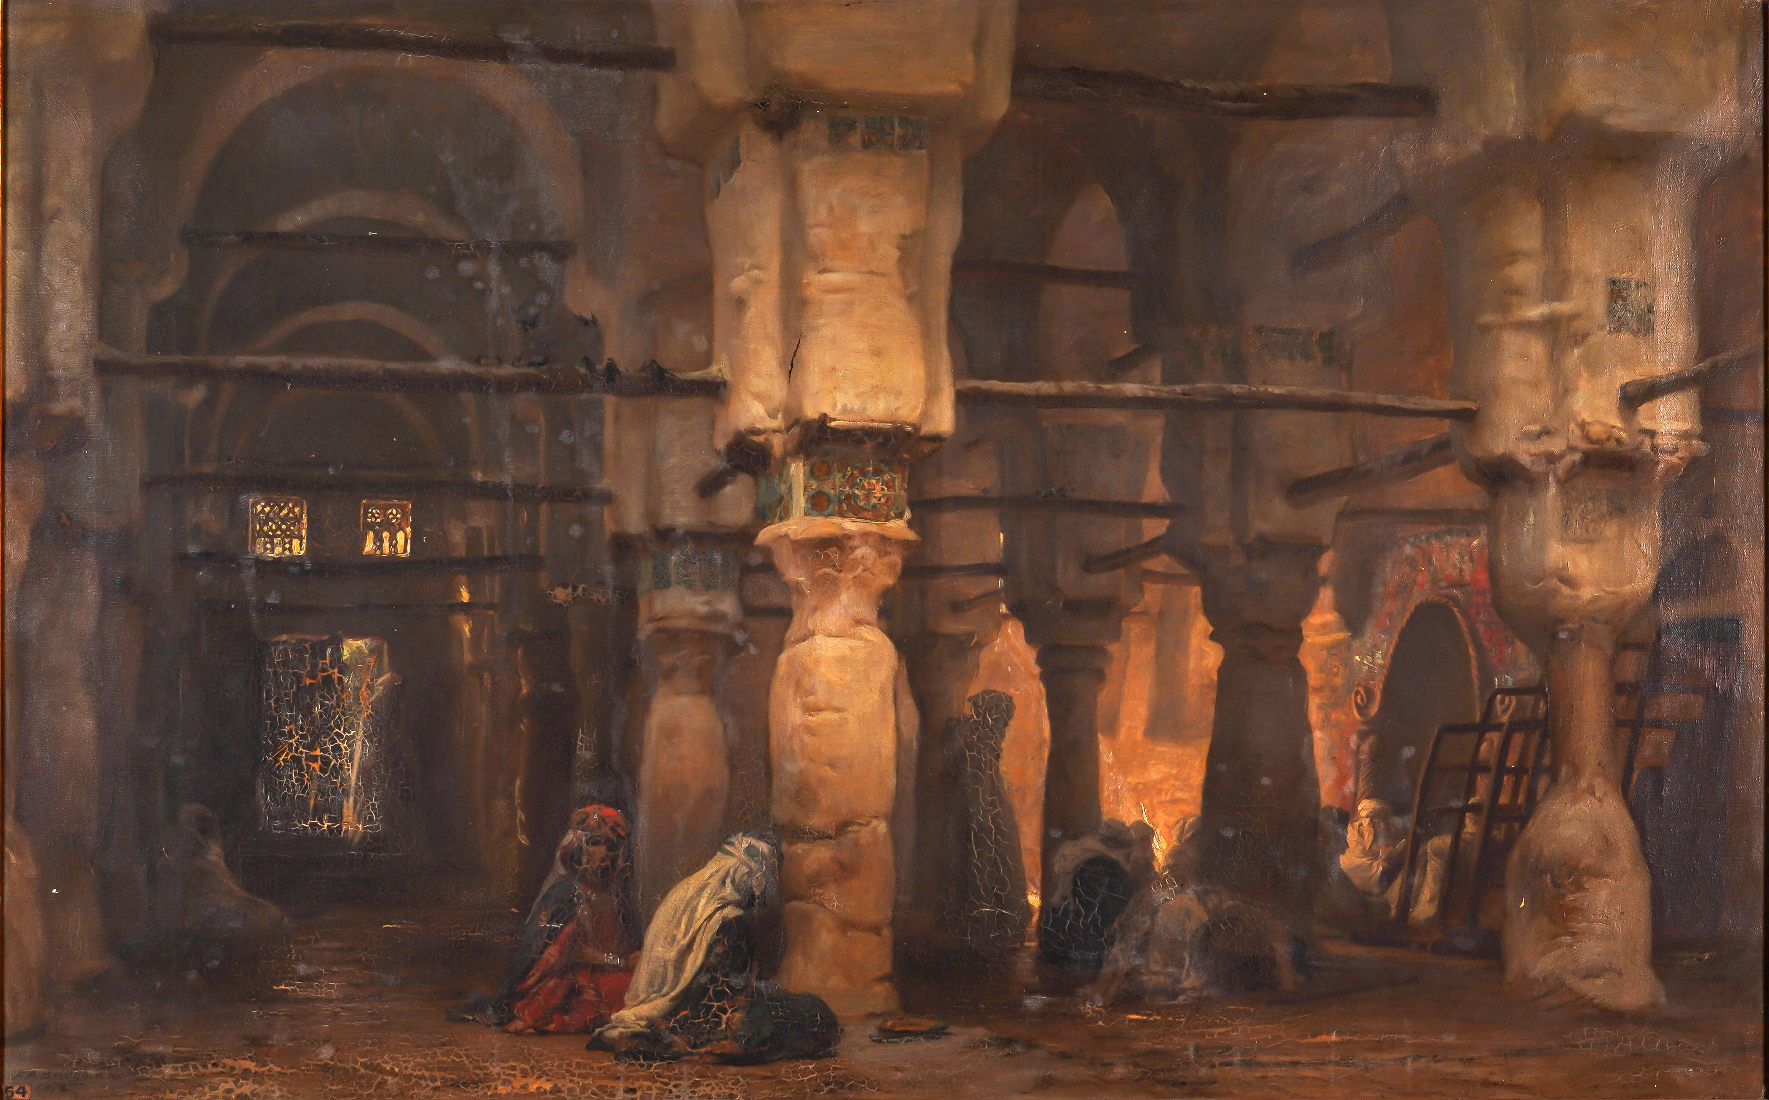 Frederick Arthur Bridgman (American, 1847-1928), “Sanctuary in the Sahara,” oil on canvas, 56 x 87cm, signed and dated ‘F. A Bridgman 1879’ (lower left); Provenance, The artist Arthur Croft (1828-1902), Thence by family descent; Exhibited London, Royal Academy, Annual, 1880, no. 1880